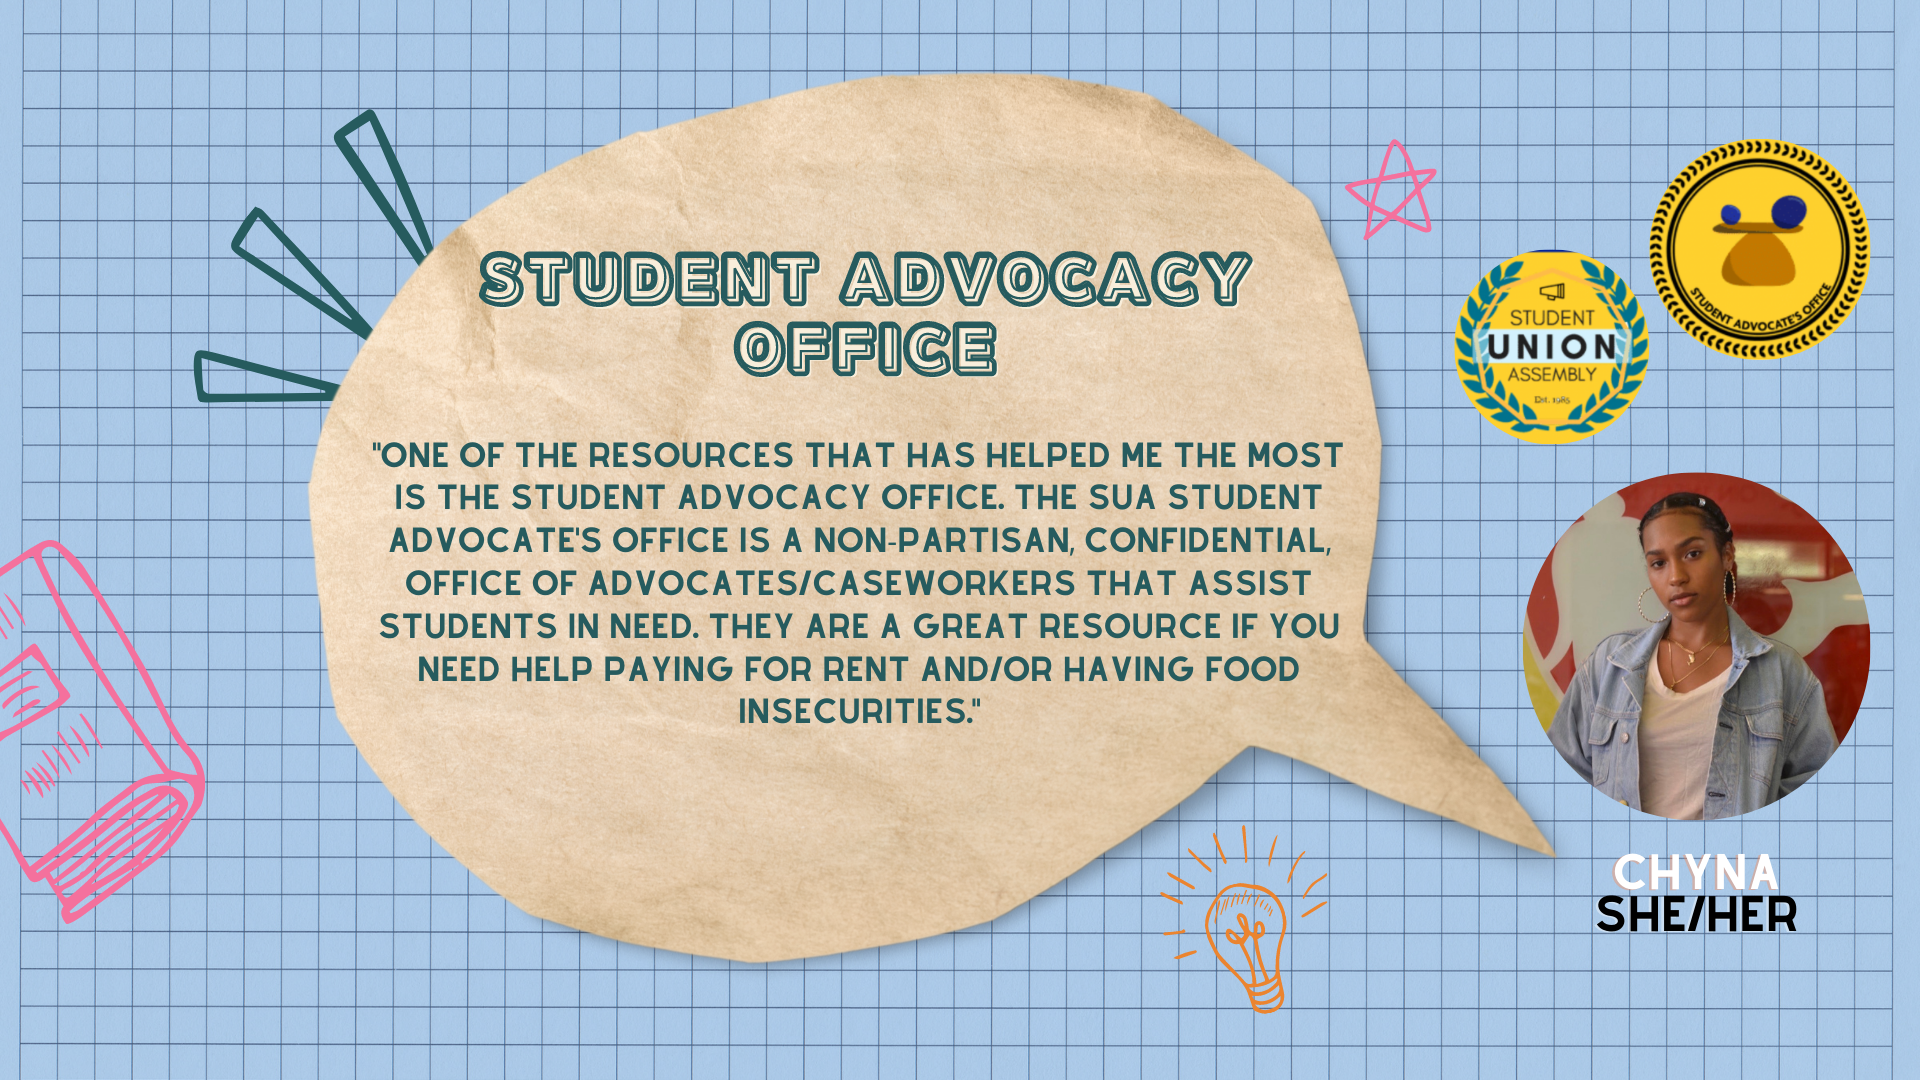 quote: "One of the resources that has helped me the most is the Student Advocacy Office. The SUA Student Advocate's Office is a non-partisan, confidential, office of advocates/caseworkers that assist students in need. They are a great resource if you need help paying for rent and/or having food insecurities."